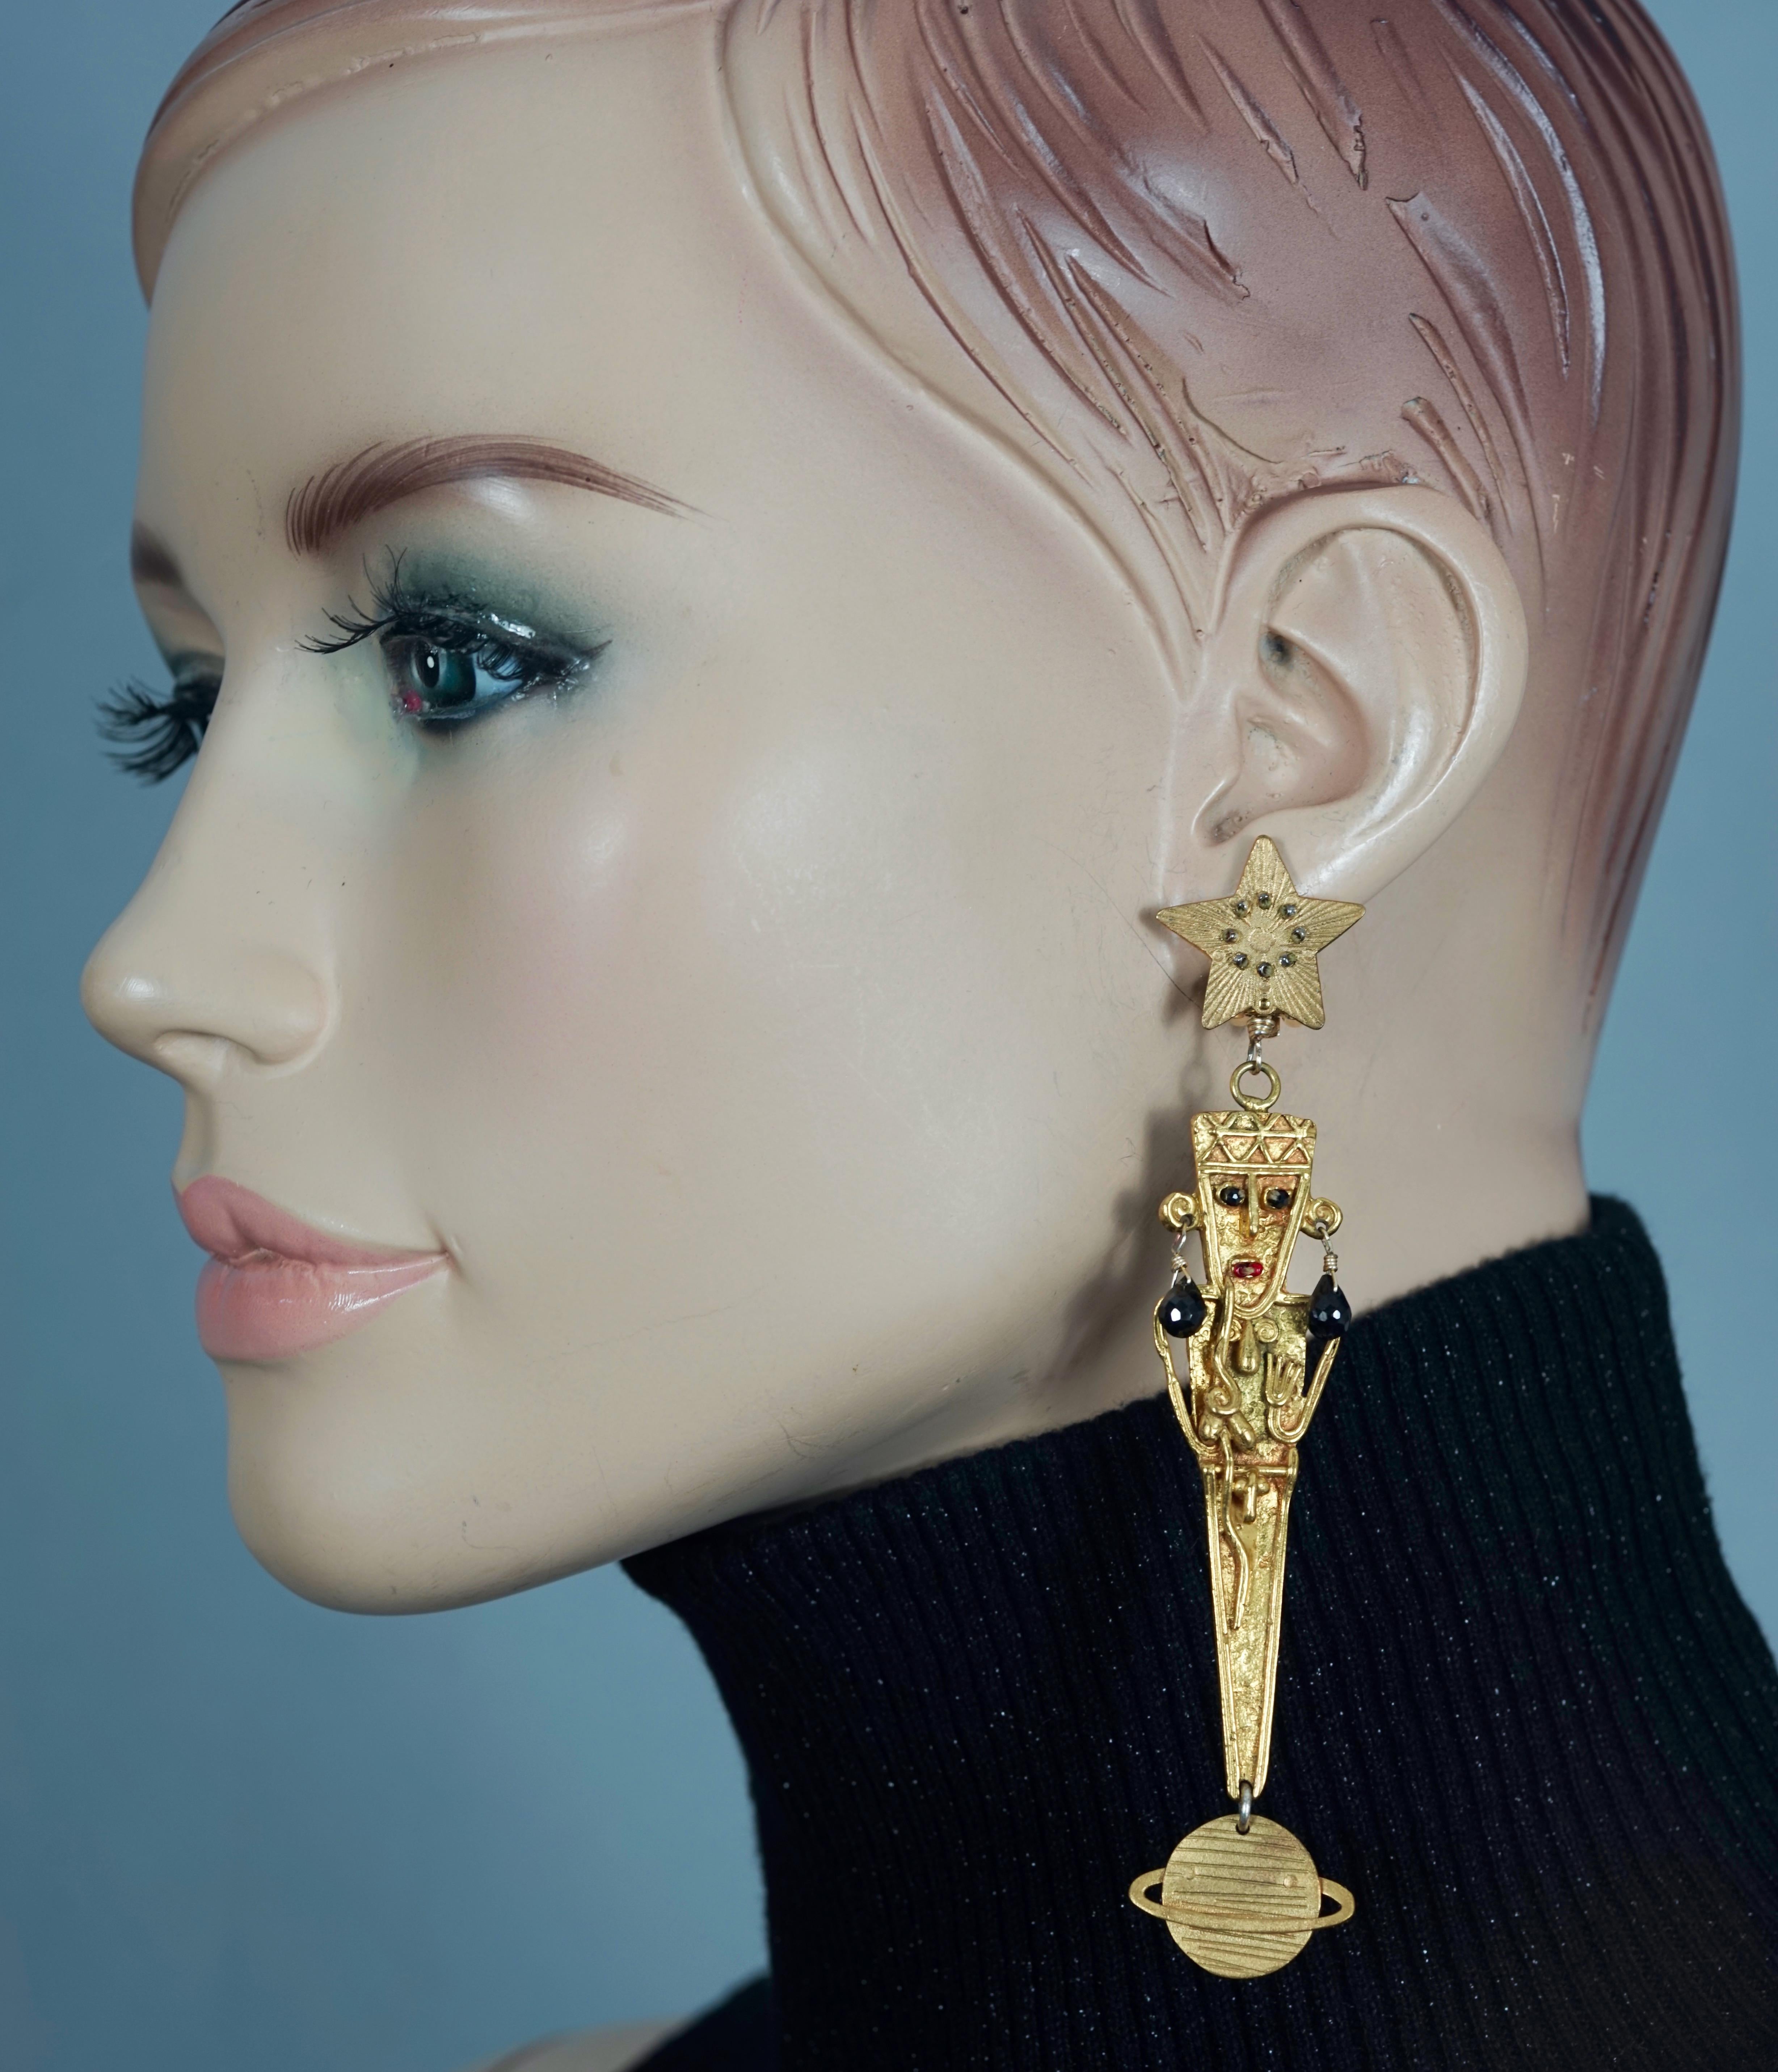 Vintage MERCEDES SALAZAR Figural Star Saturn Dangling Earrings

Measurements:
Height: 4.53 inches (11.5 cm) 
Width: 0.78 inch (2 cm)
Weight per Earring: 13 grams

Features:
- 100% Authentic MERCEDES SALAZAR.
- Depicting star, human figure and Saturn